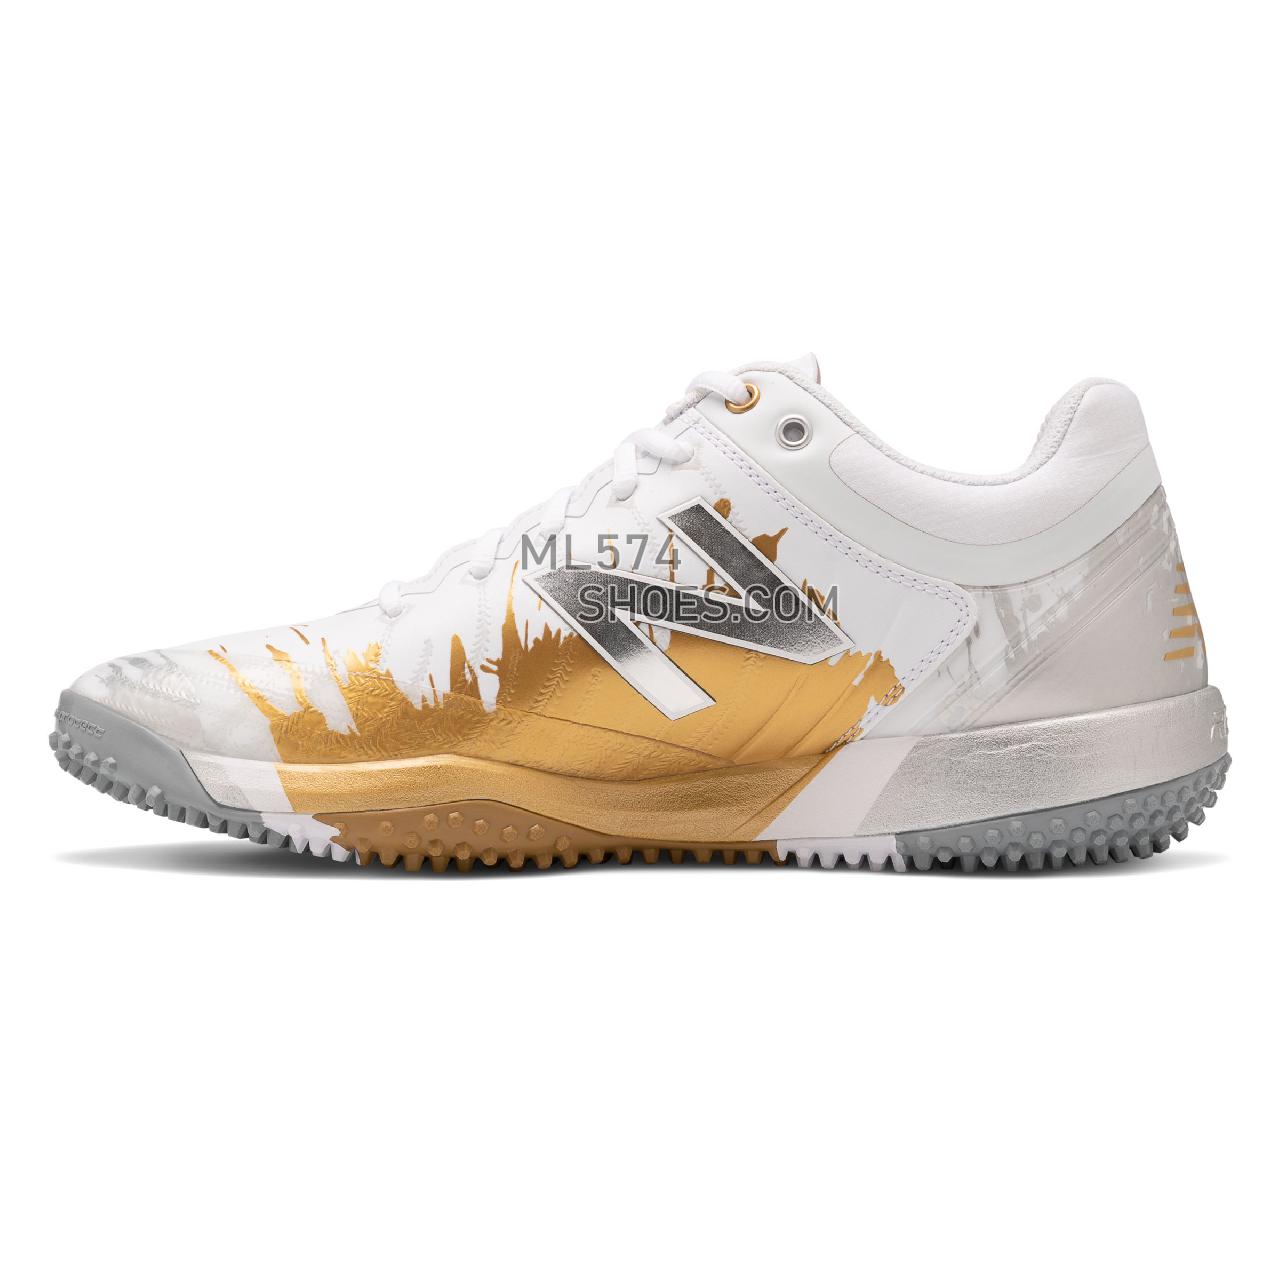 New Balance 4040v5 Turf Playoff Pack - Men's Baseball Turf - Silver with Gold and White - TS4040C5